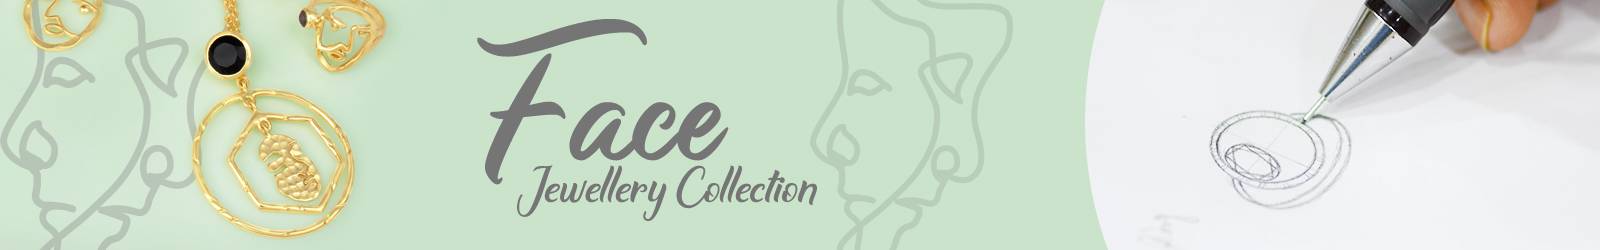 Face Jewellery Collection